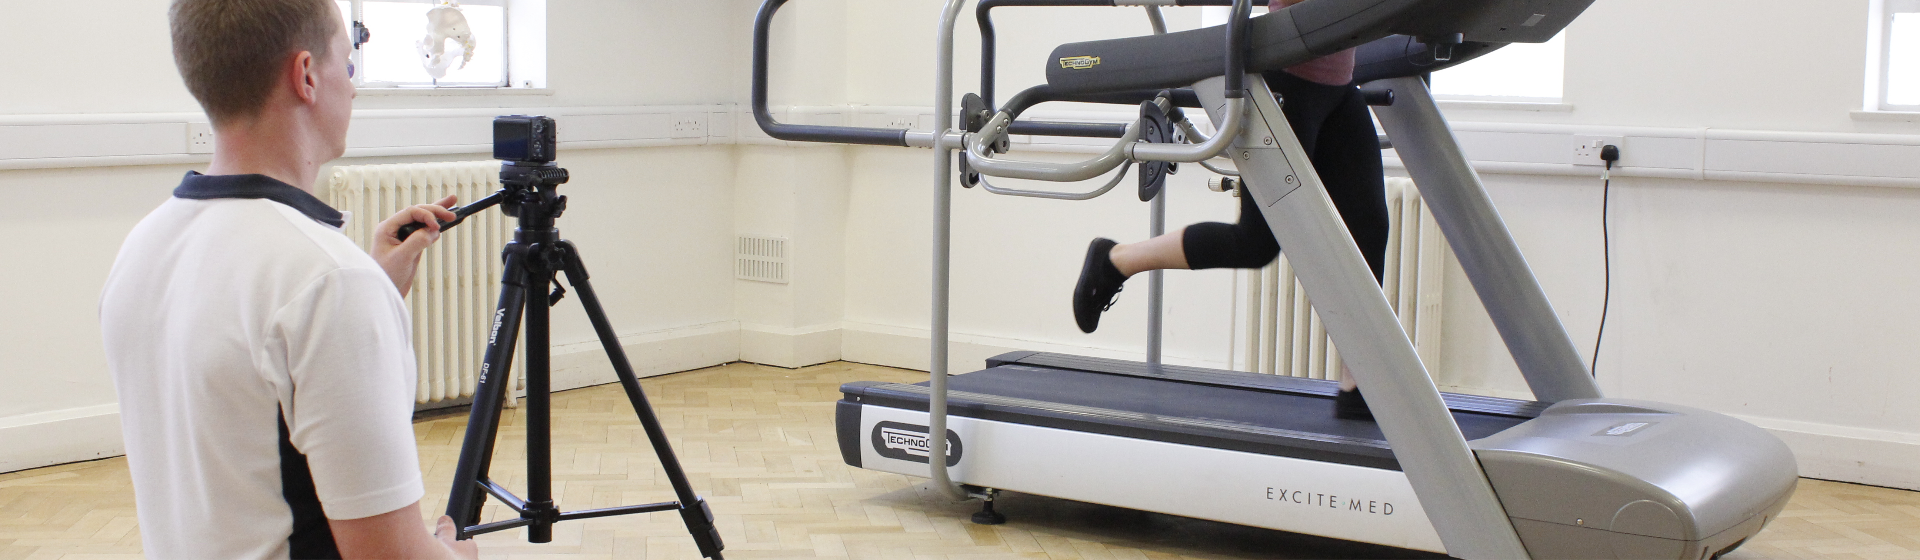 Physiotherapist recording running techniques of athlete on treadmill